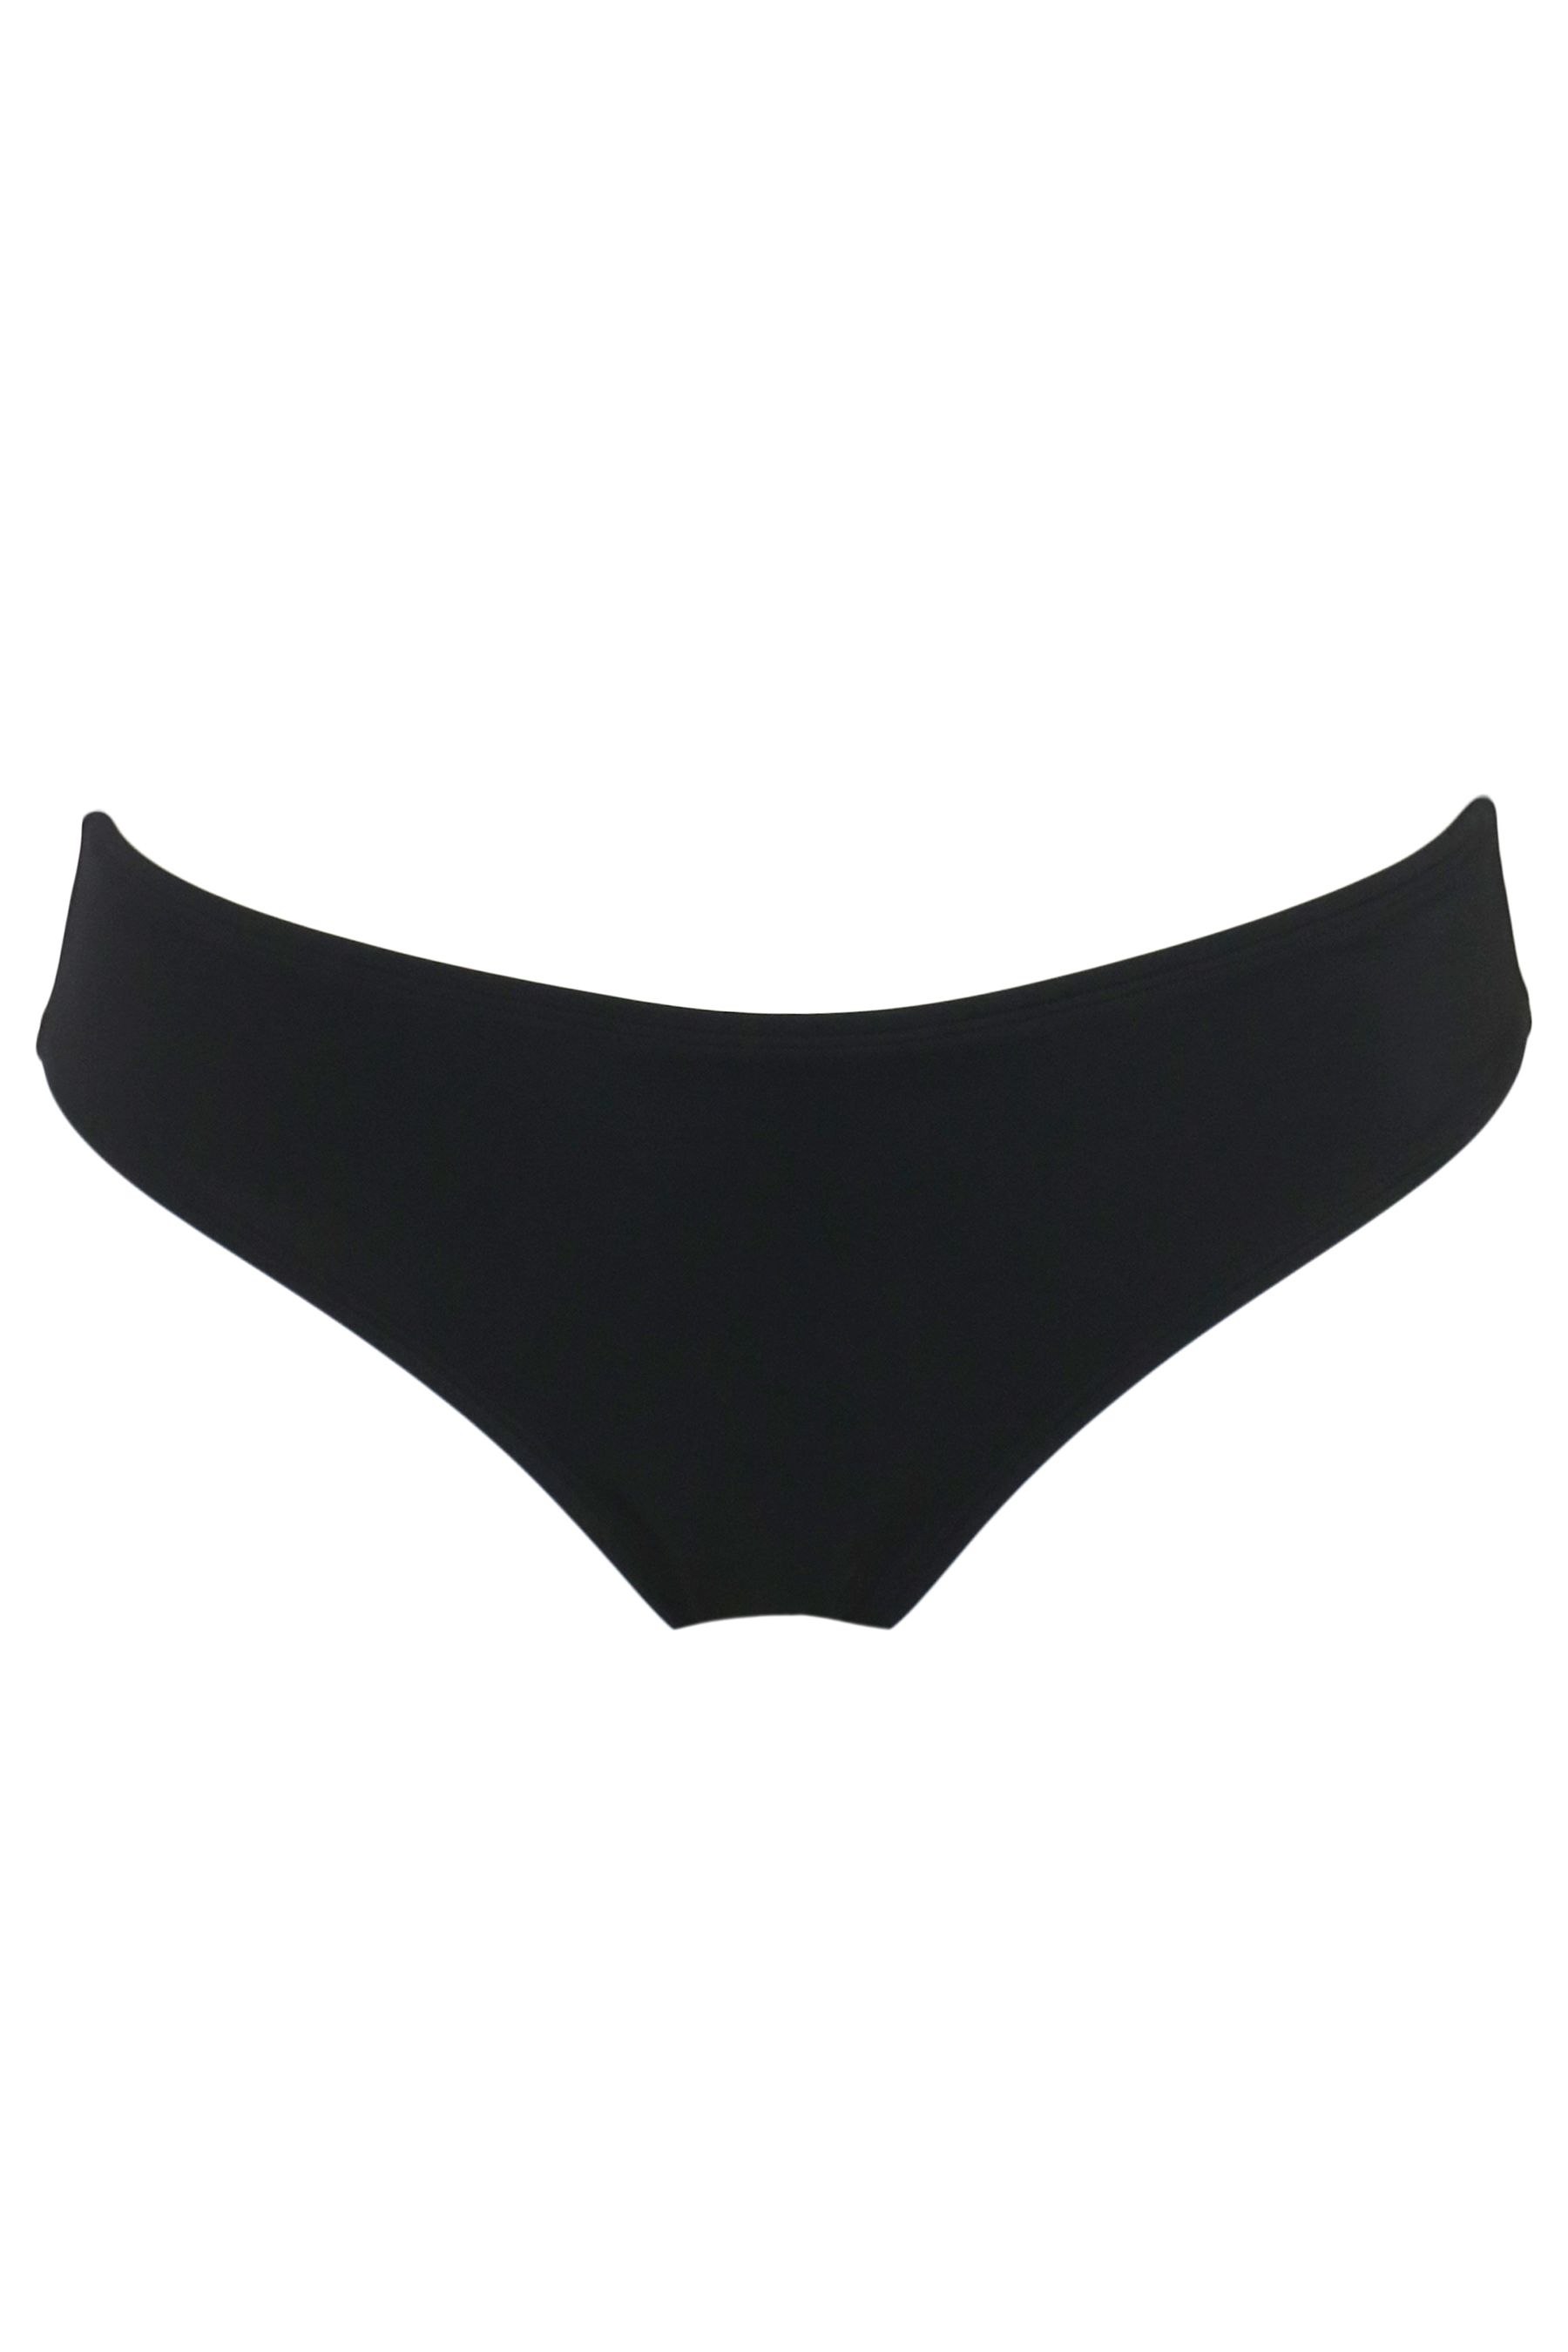 Buy Pour Moi Black Brief Madrid Bikini Bottoms from the Next UK online shop